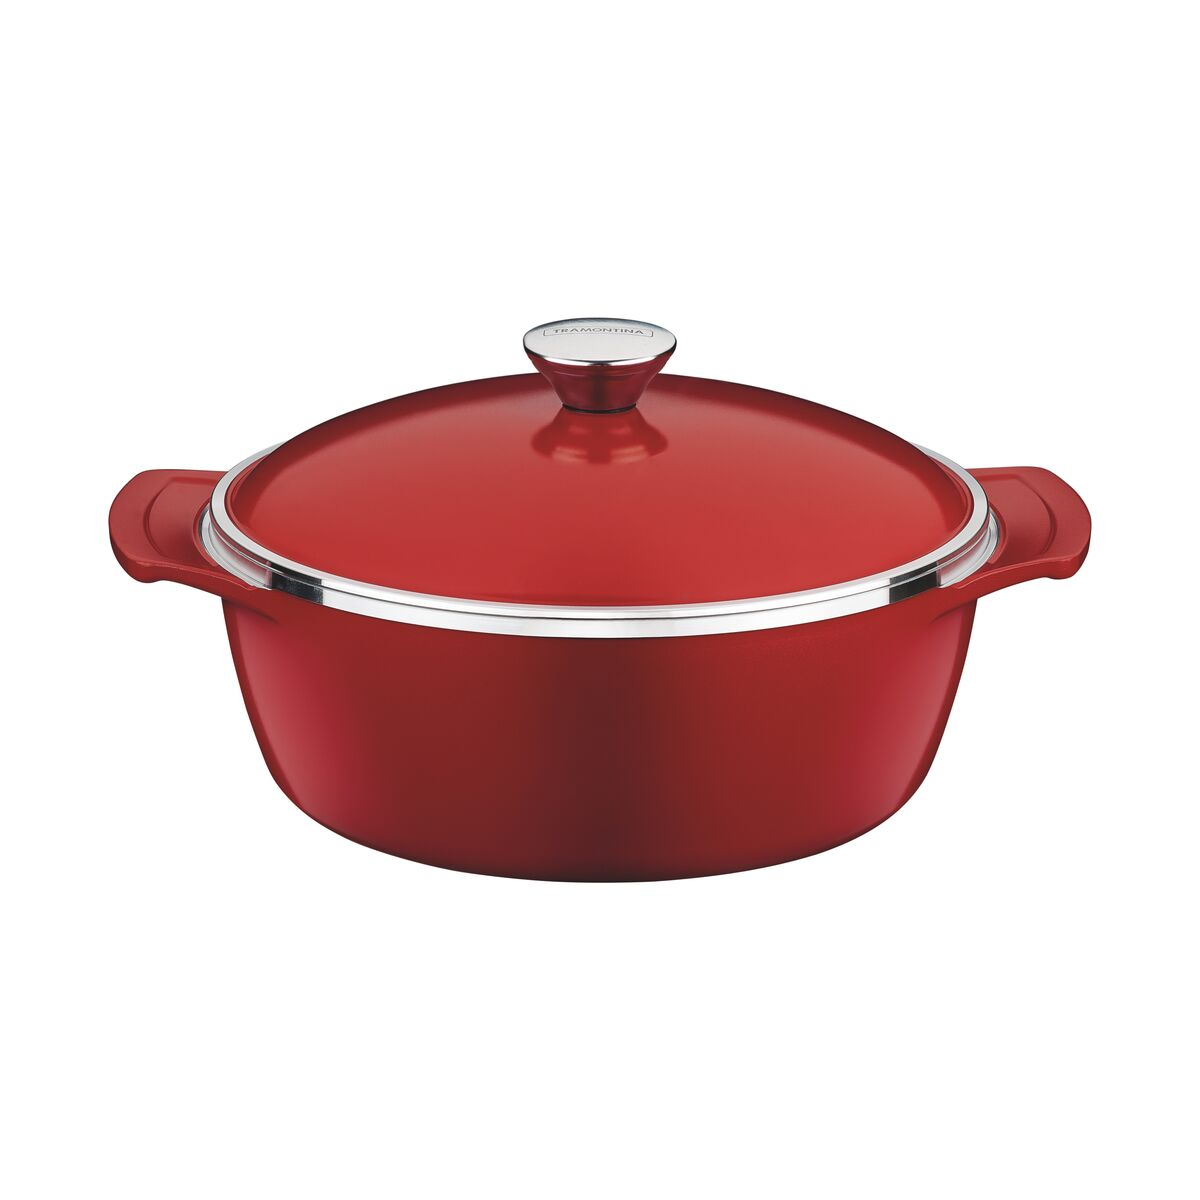 Tramontina Lyon forged aluminum, red casserole with interior Starflon High Performance nonstick coating and lid, 26 cm, 4.6 L